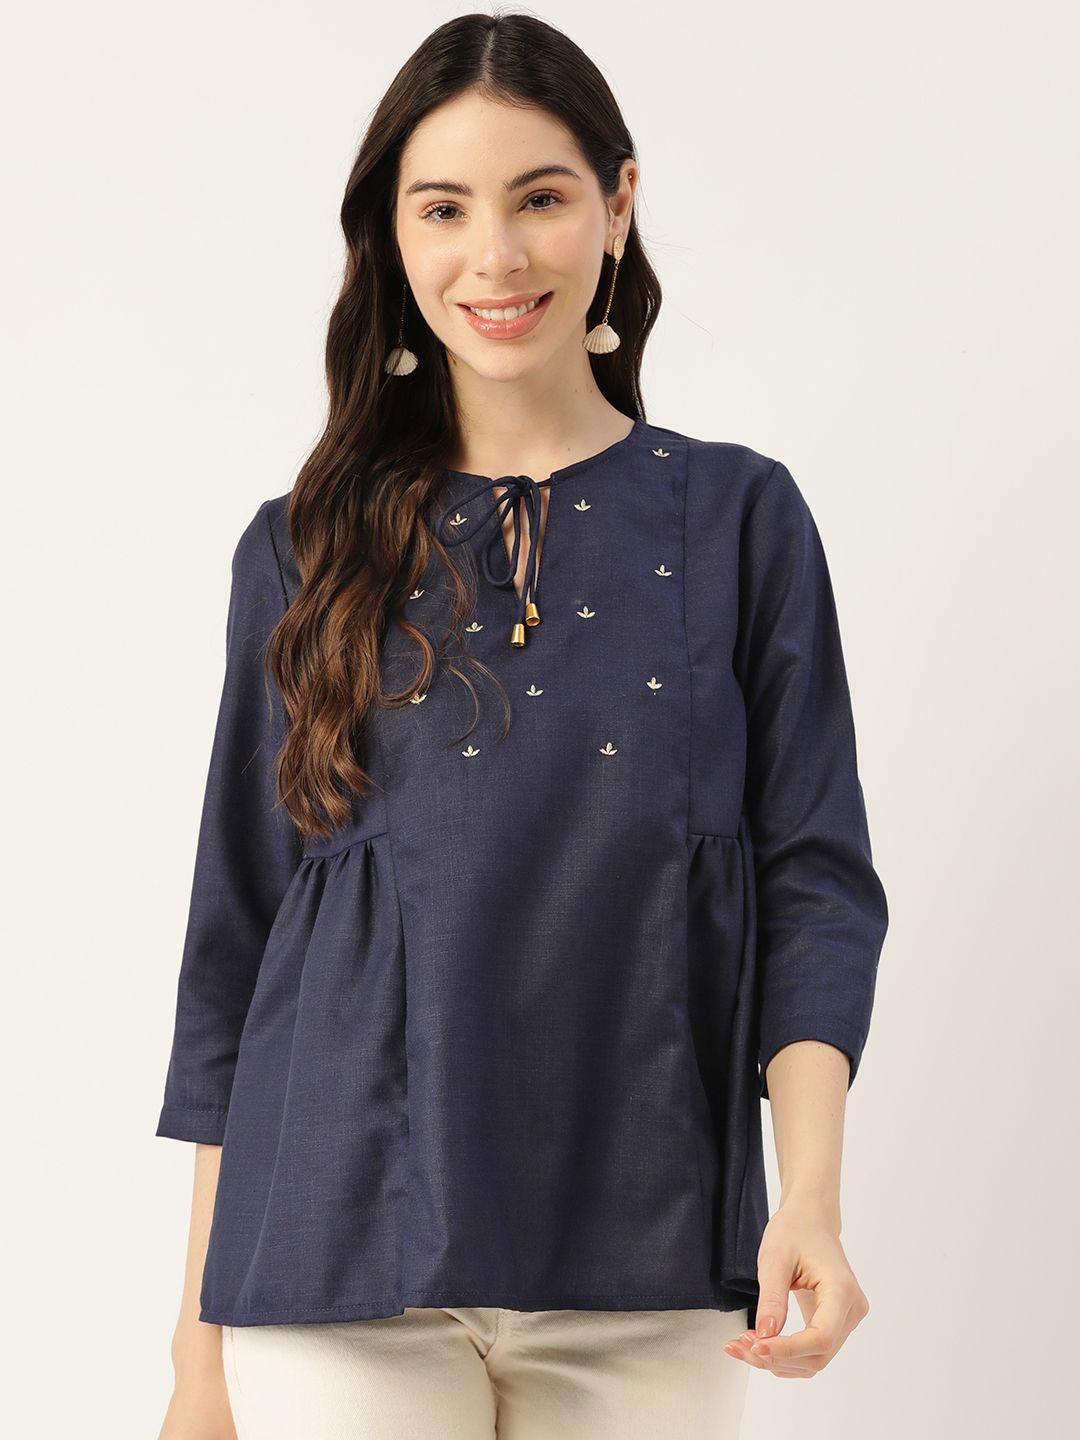 off label navy blue floral embroidered top